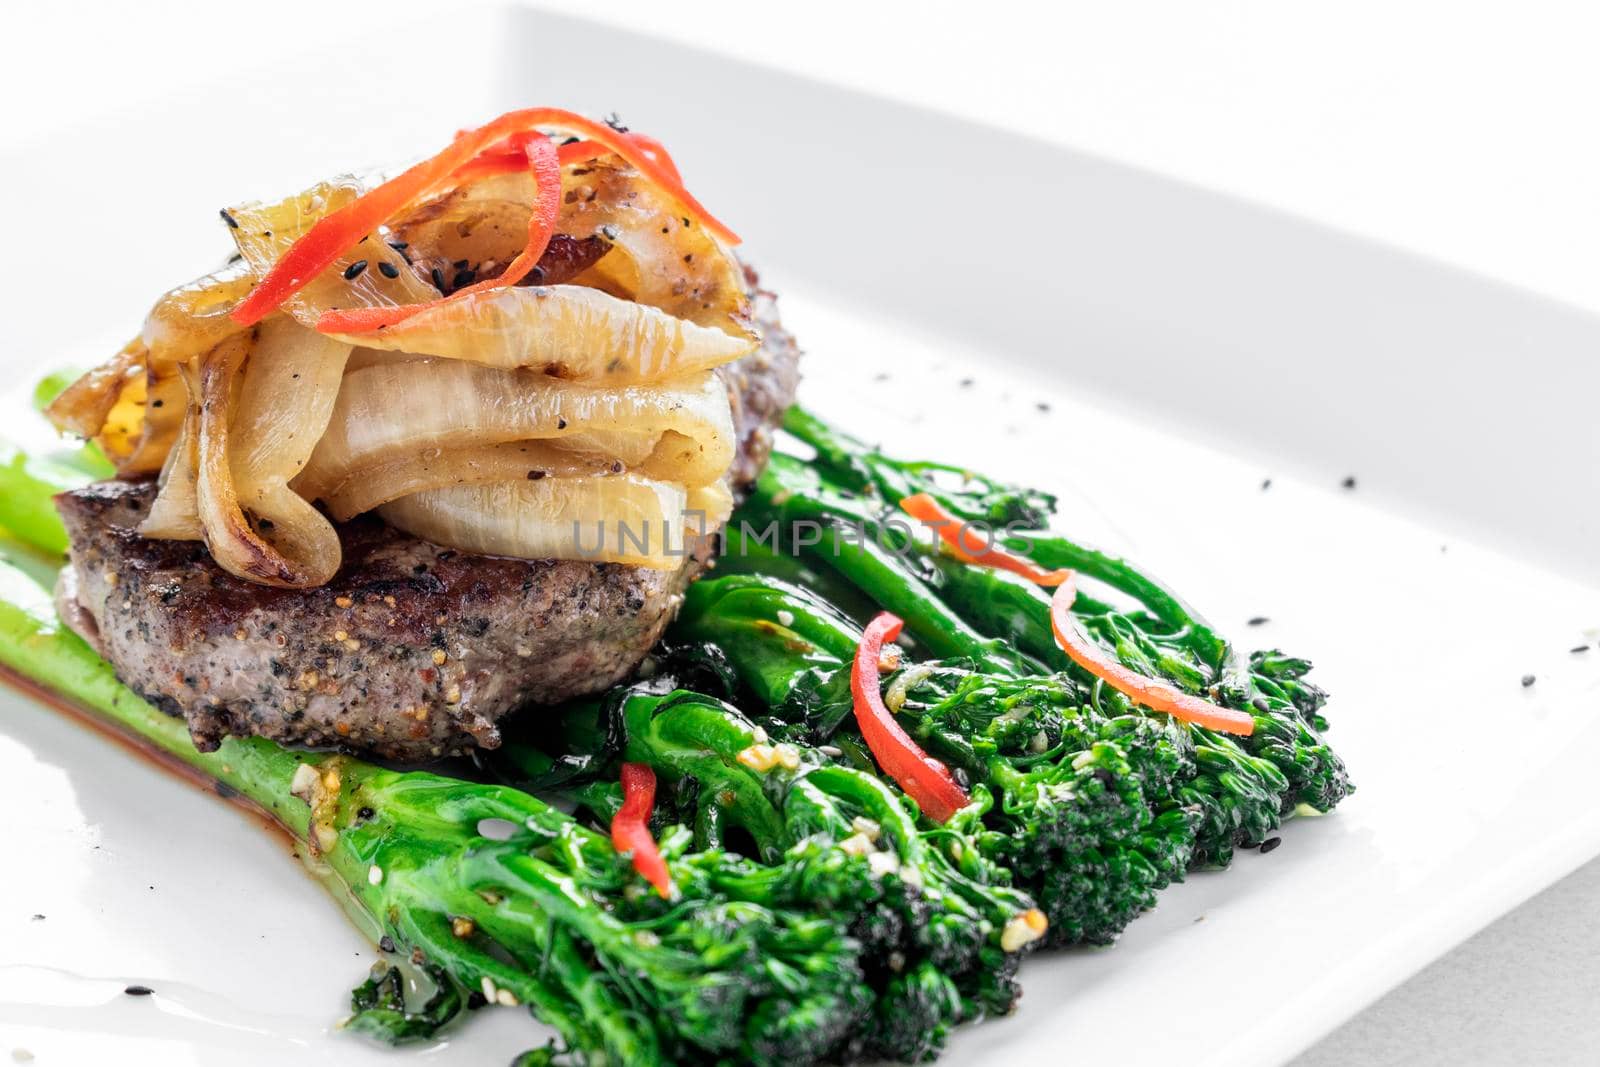 beef steak with caramelized onions and broccoli gourmet restaurant meal by jackmalipan